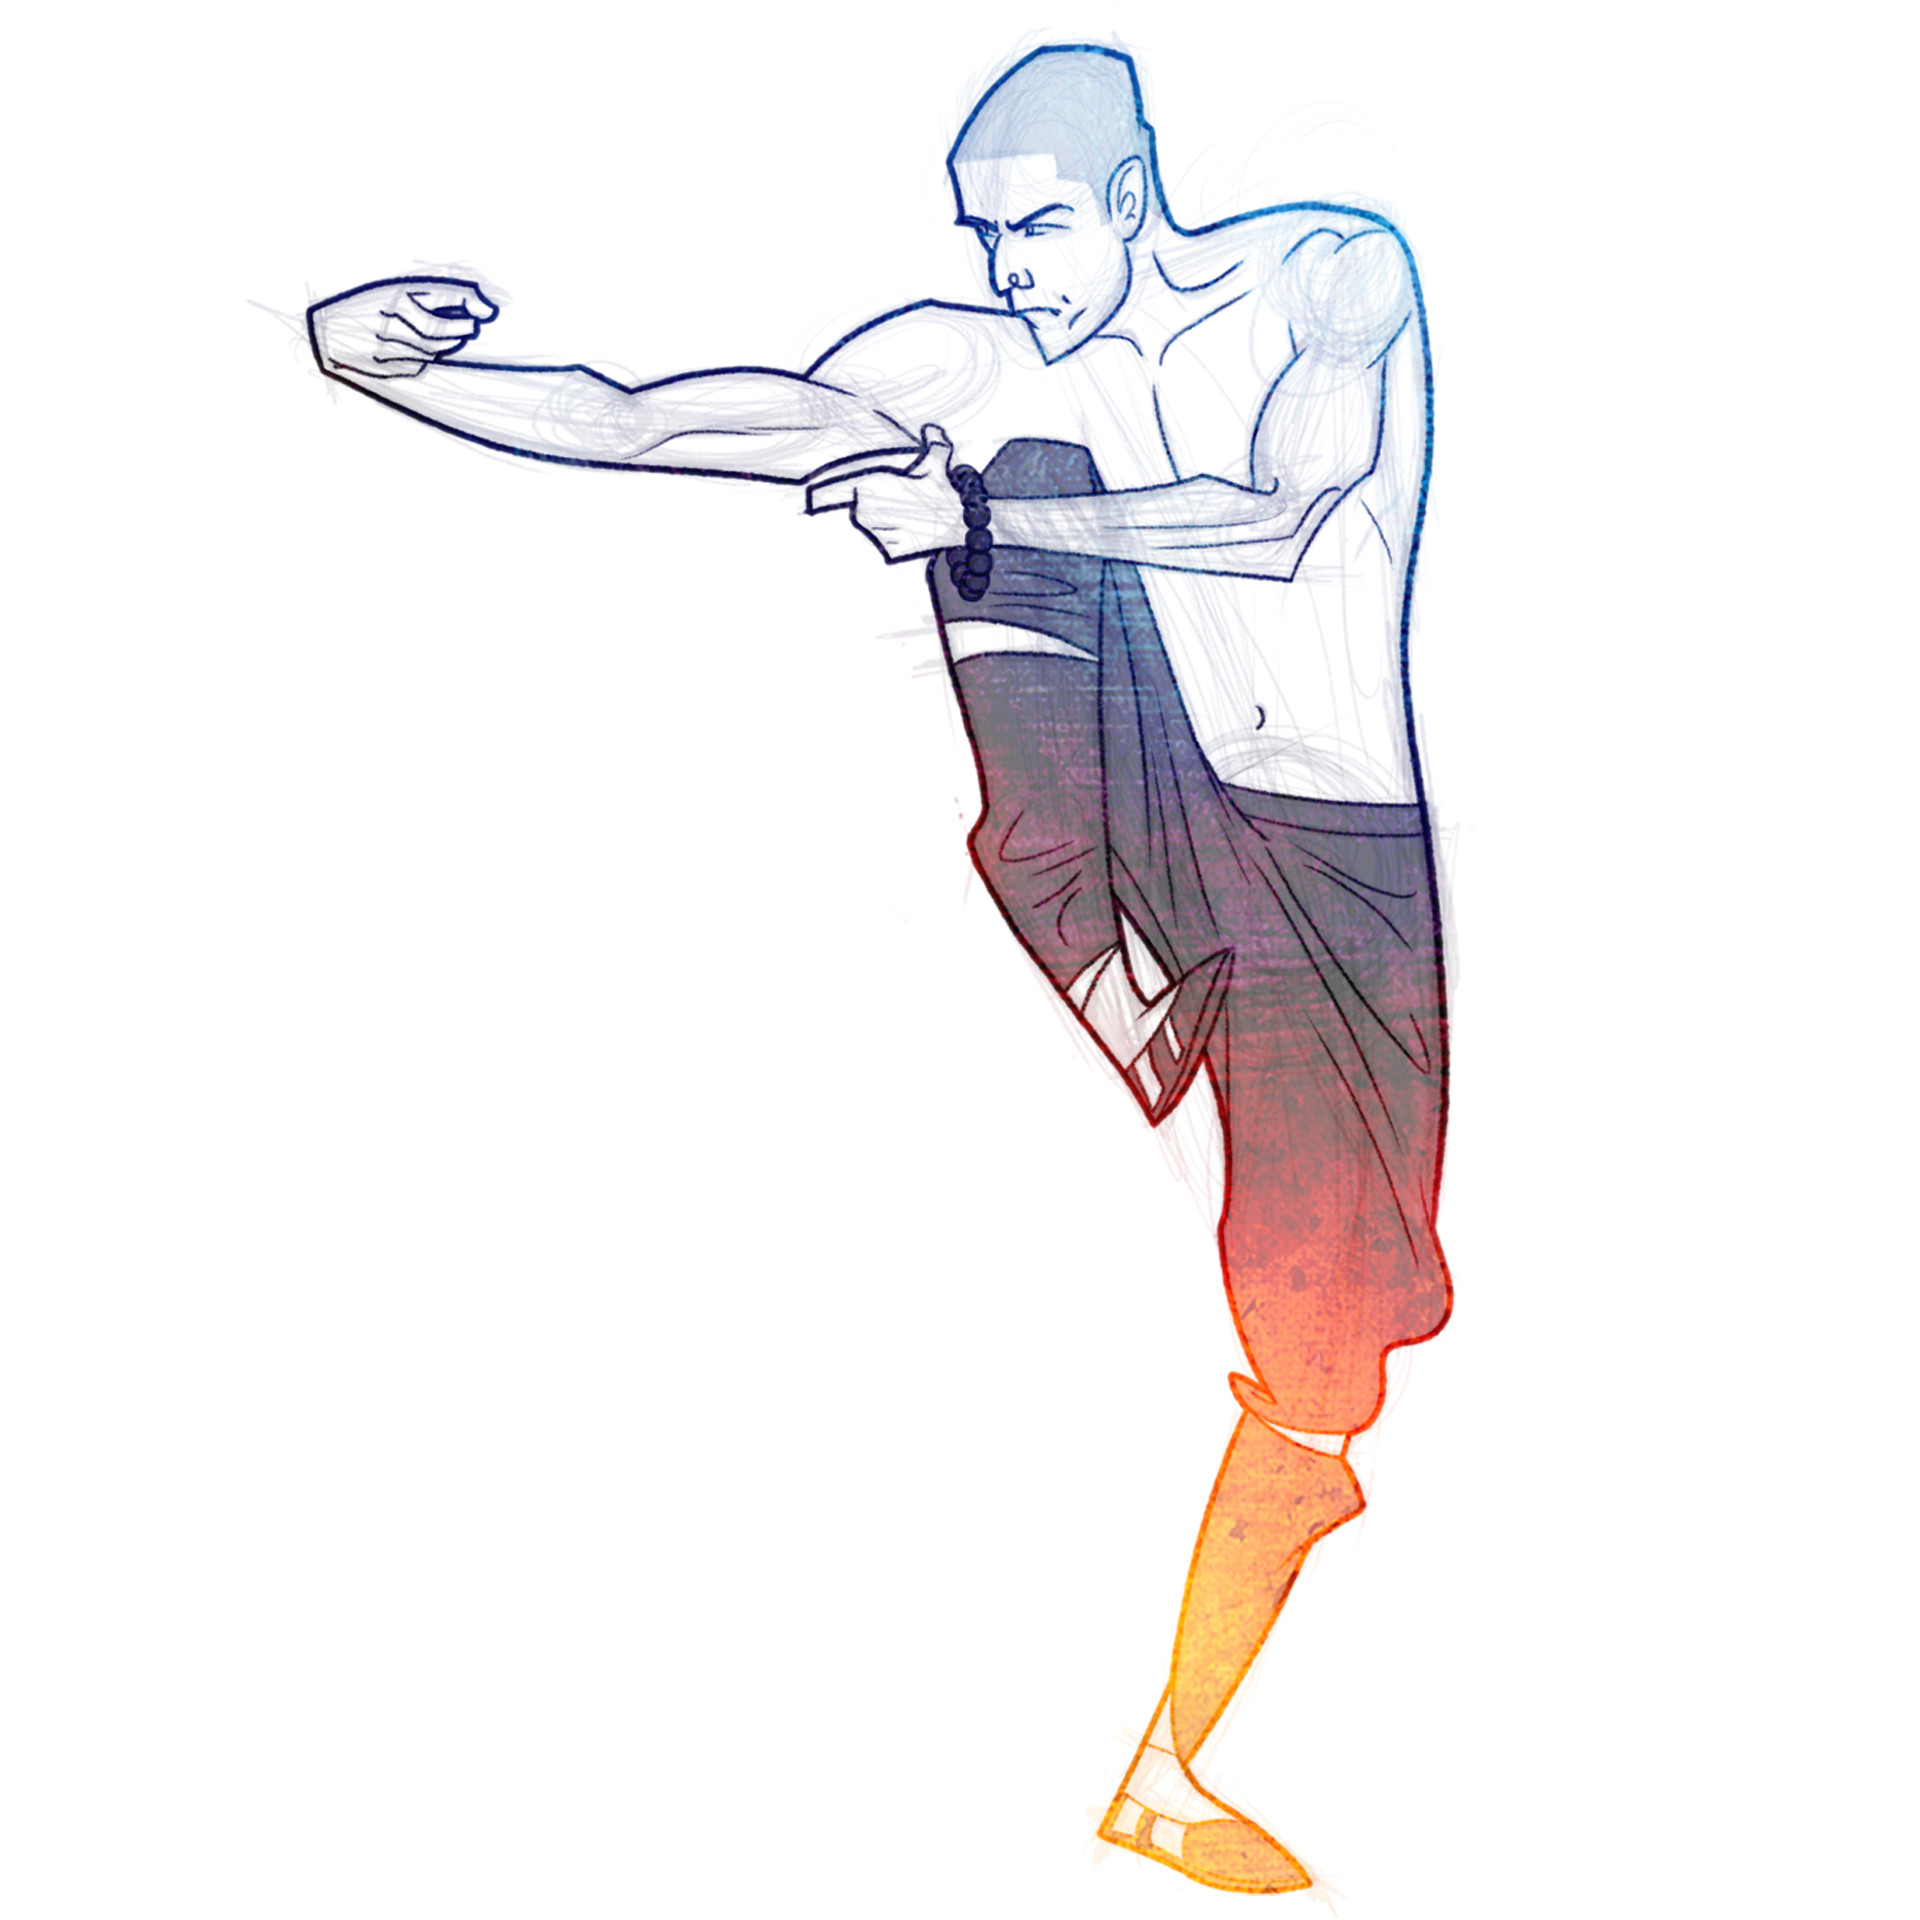 Draw a Kung Fu Tiger Stance - tutorial - YouTube